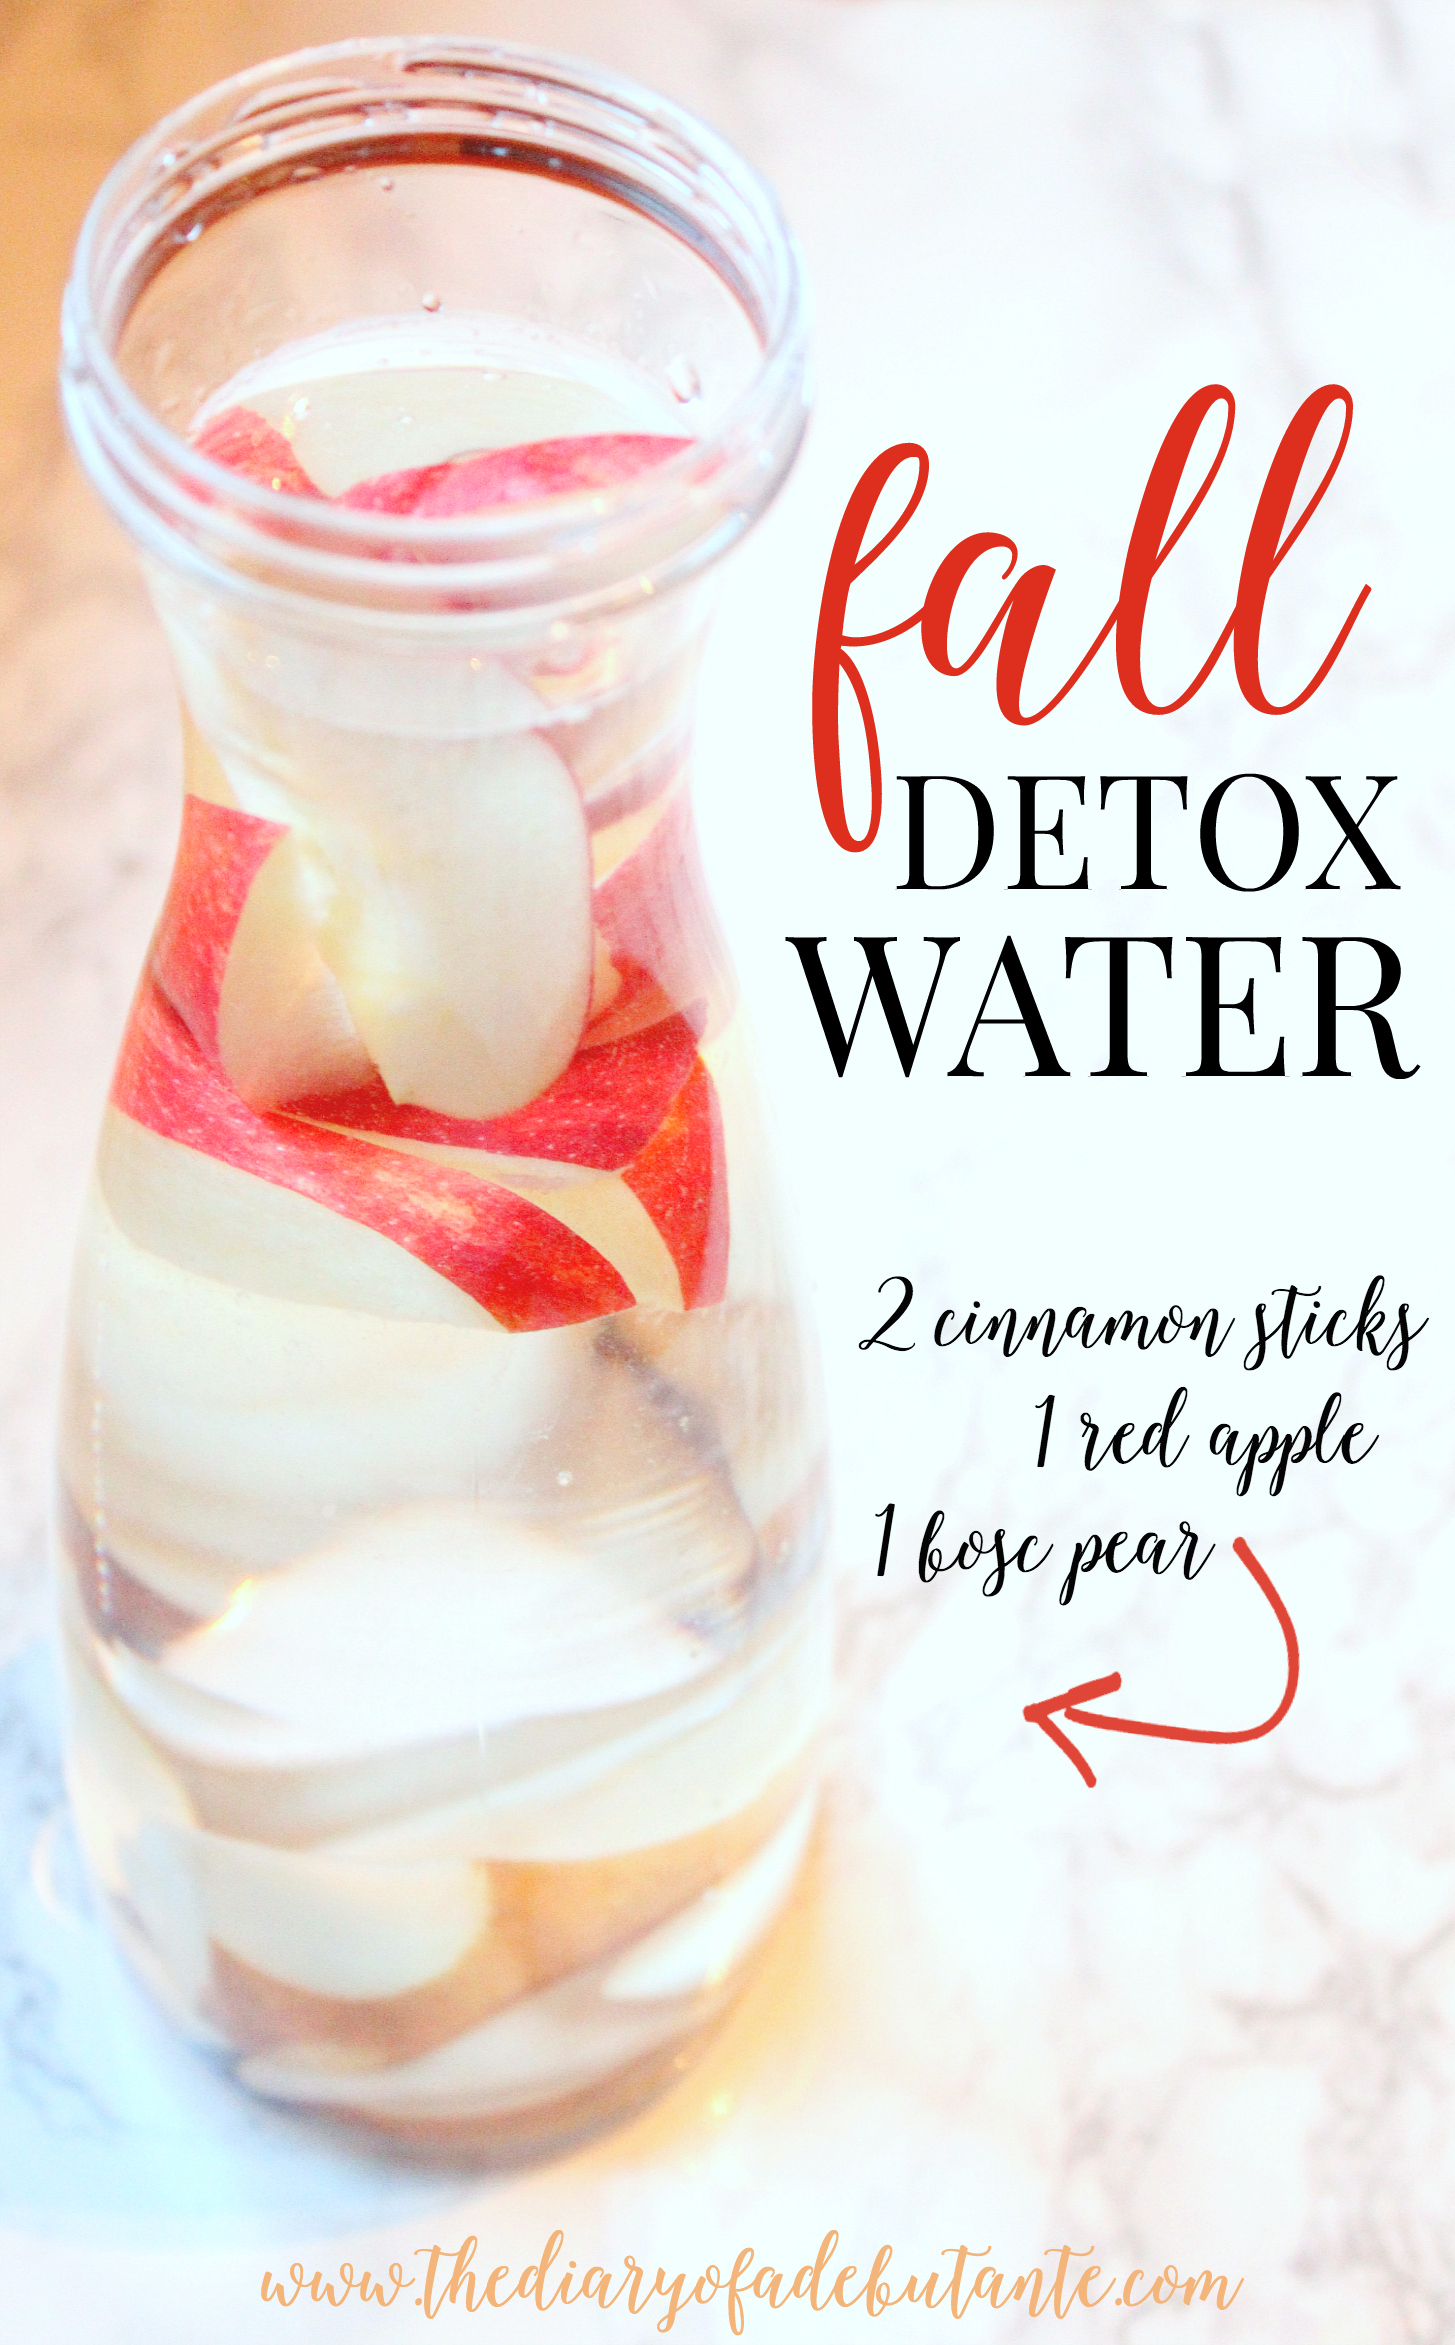 This cinnamon apple pear fall detox water is a must-try this holiday season for warding off stomach aches and holiday sugar highs!